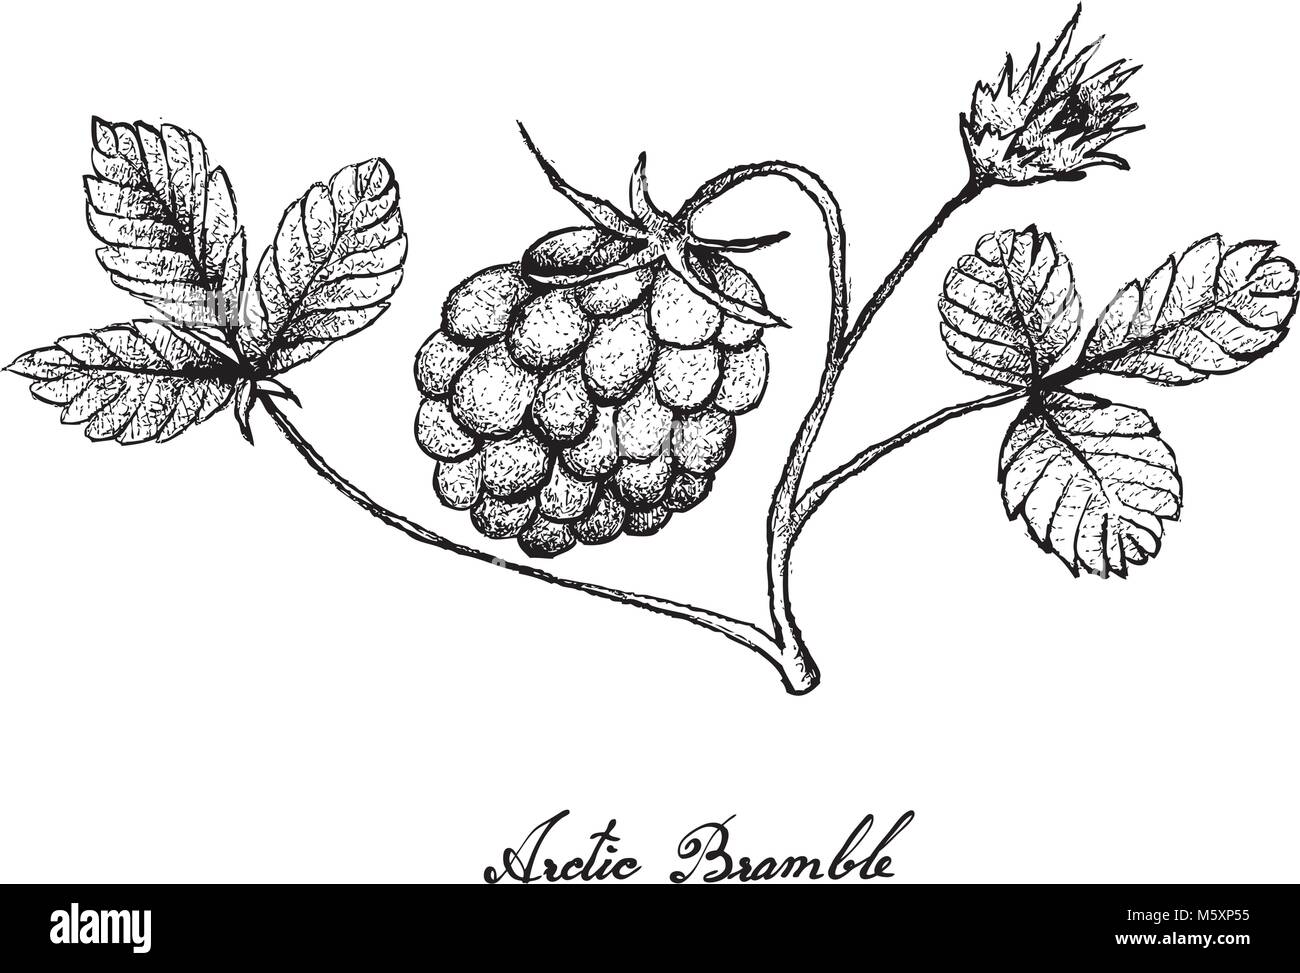 Berry Fruit, Illustration Hand Drawn Sketch of Fresh Arctic Bramble, Arctic Raspberry or Rubus Arcticus Fruits Isolated on White Background. Stock Vector